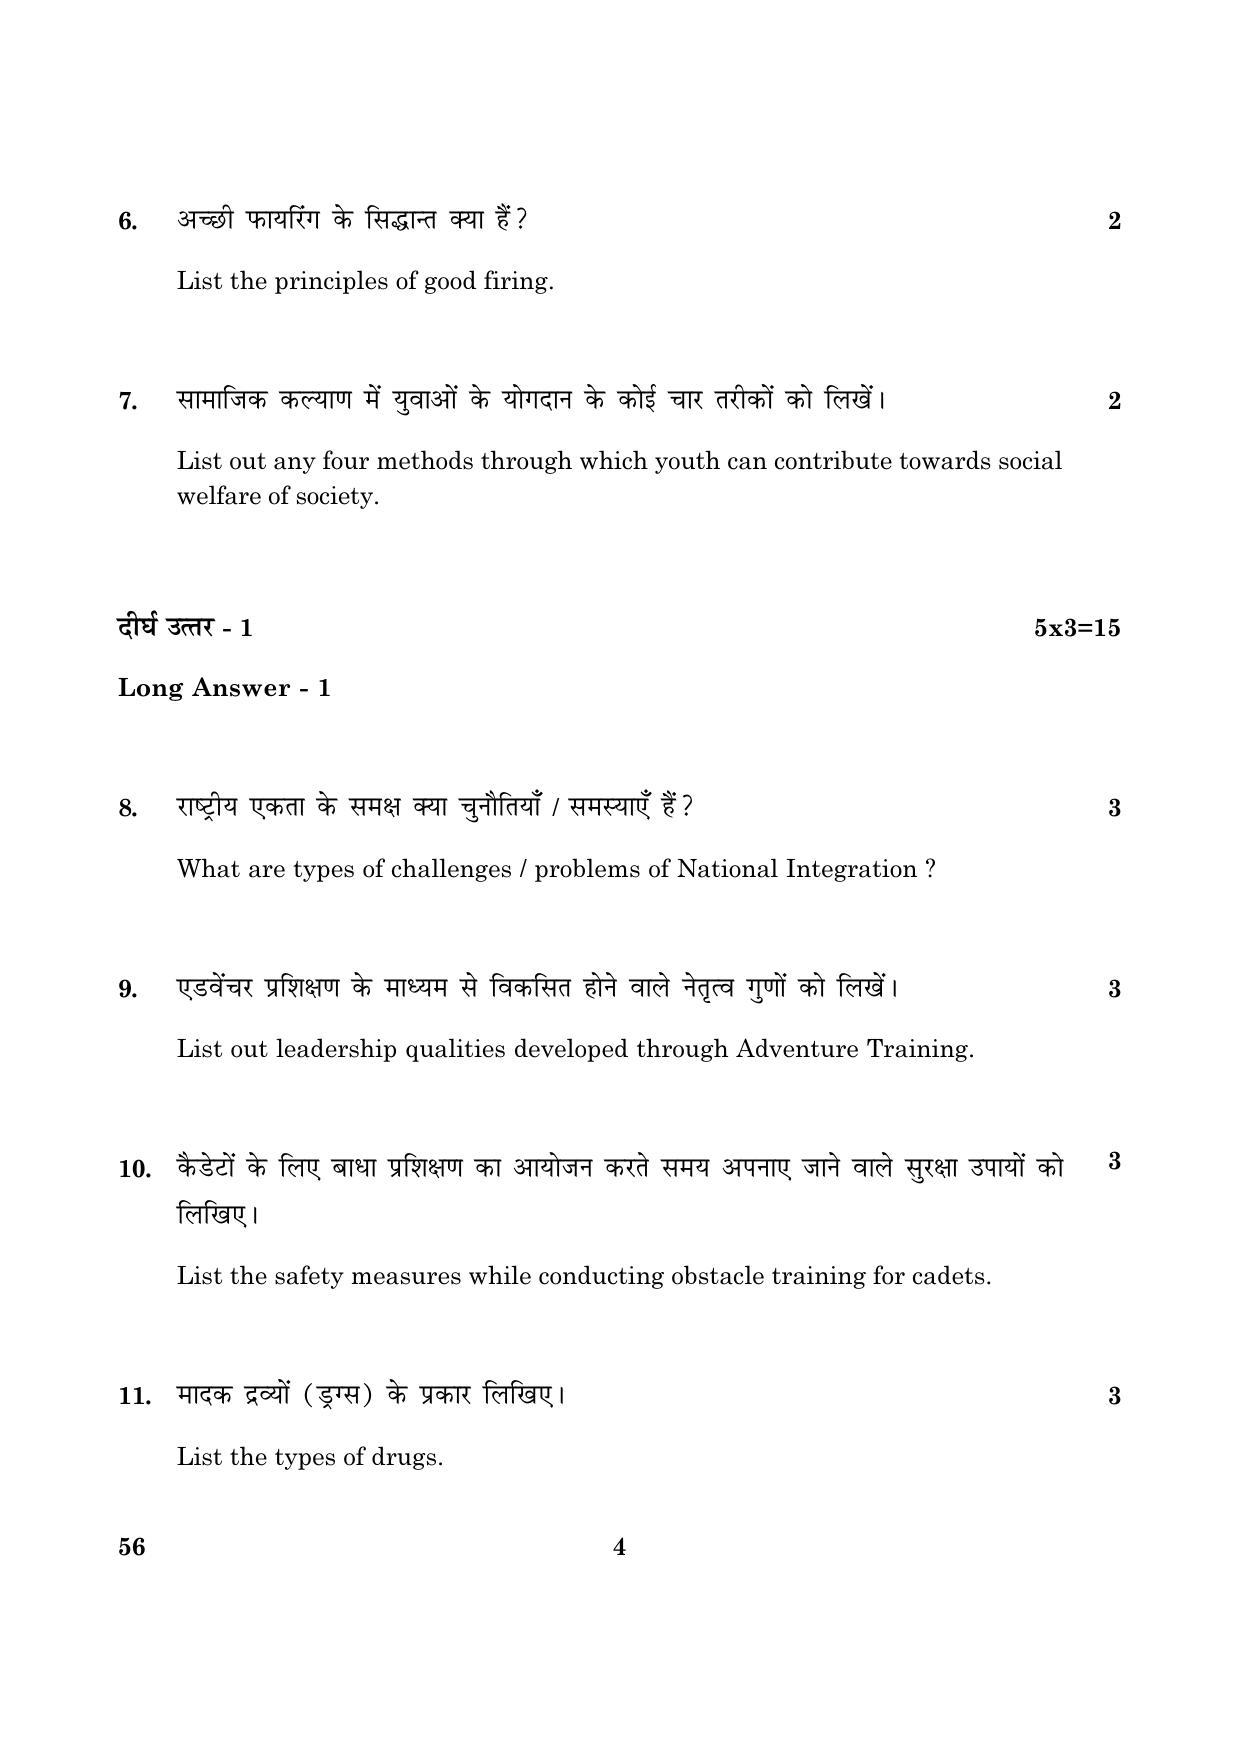 CBSE Class 10 056 National Cadet Corps 2016 Question Paper - Page 4